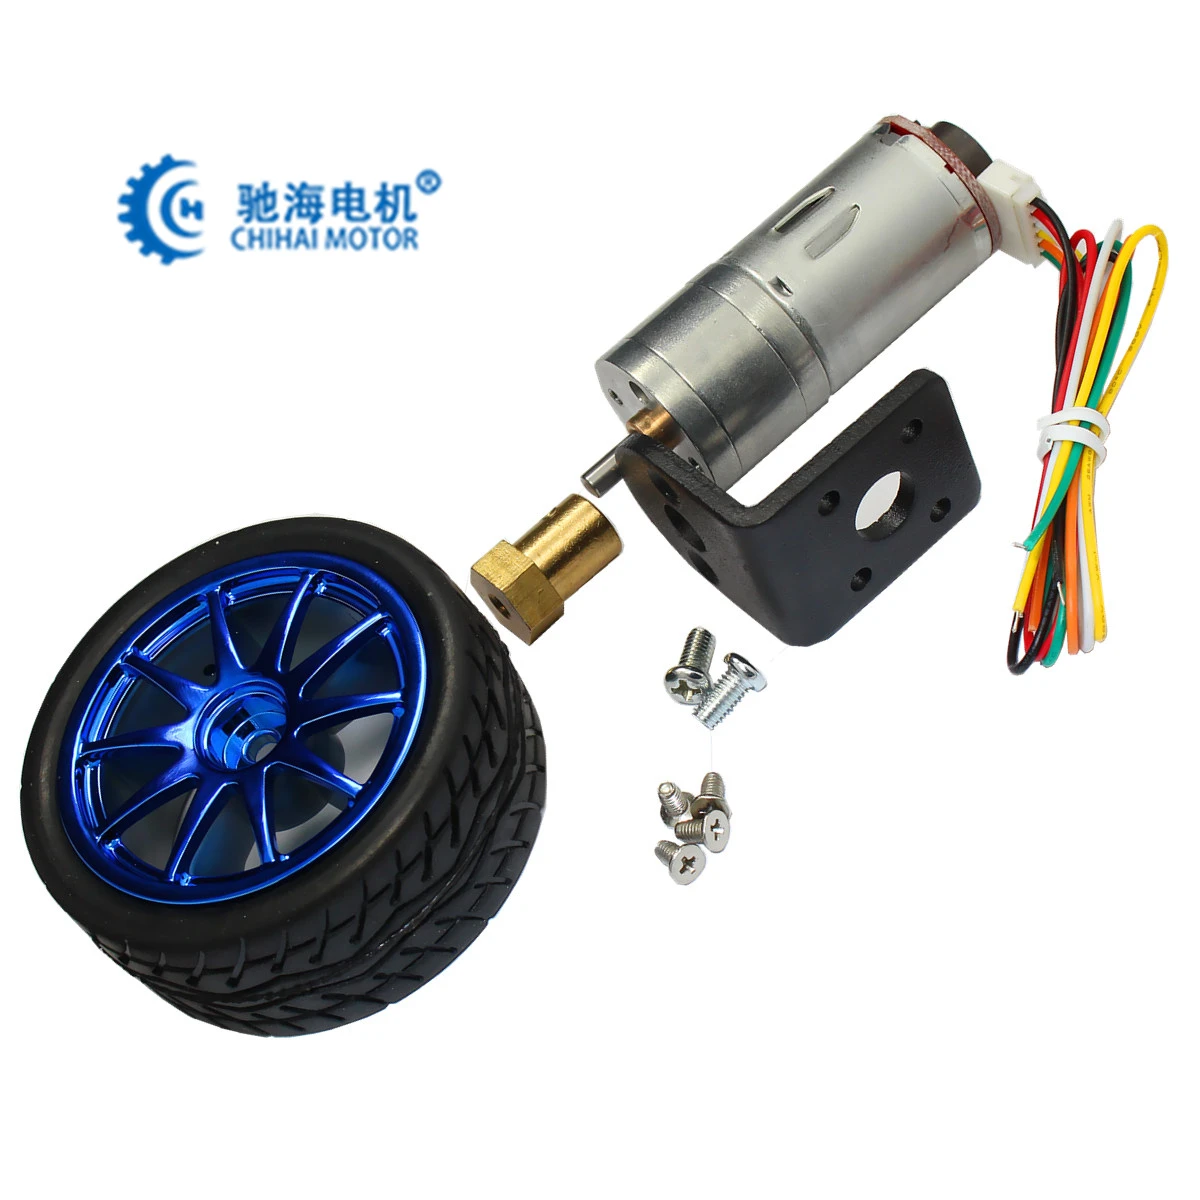 DC6V 25GA-370 Geared Motors with 65mm Tire for Smart Car Trolley 620RPM 